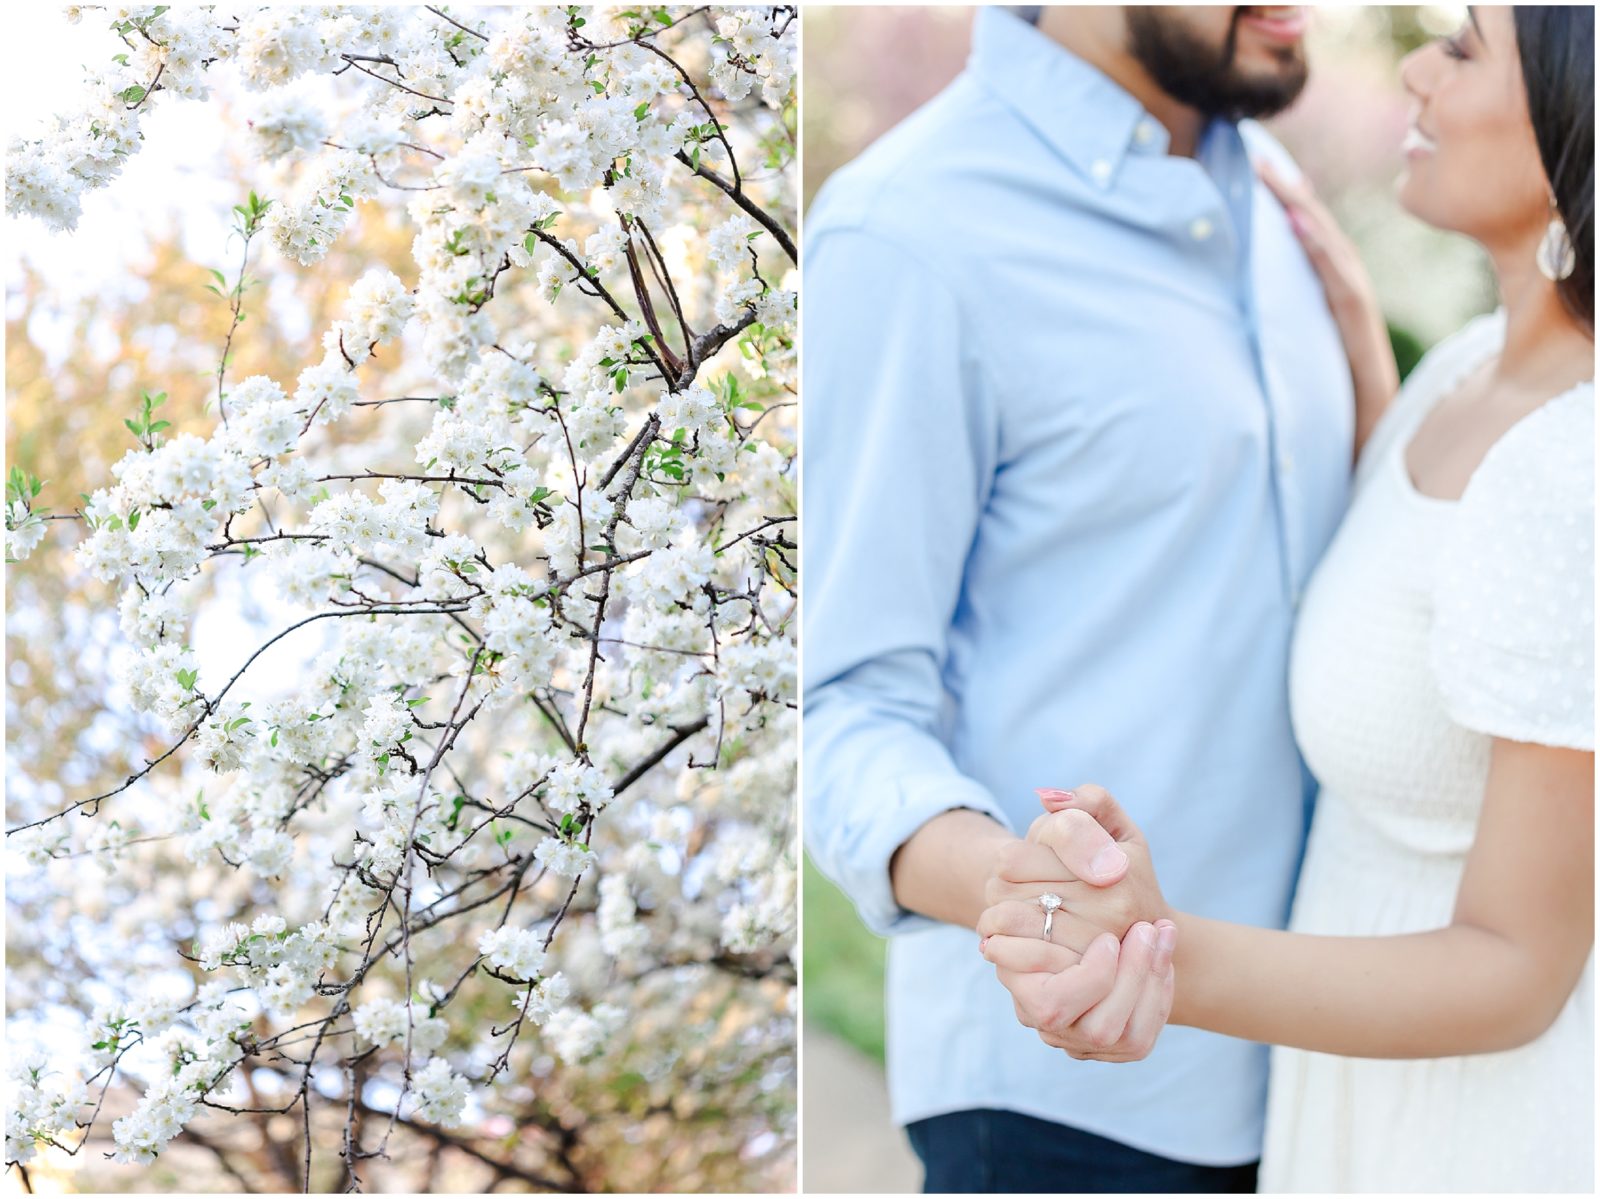 What to Wear for Engagement Session | 5 Tips What to Wear for Your Engagement Session